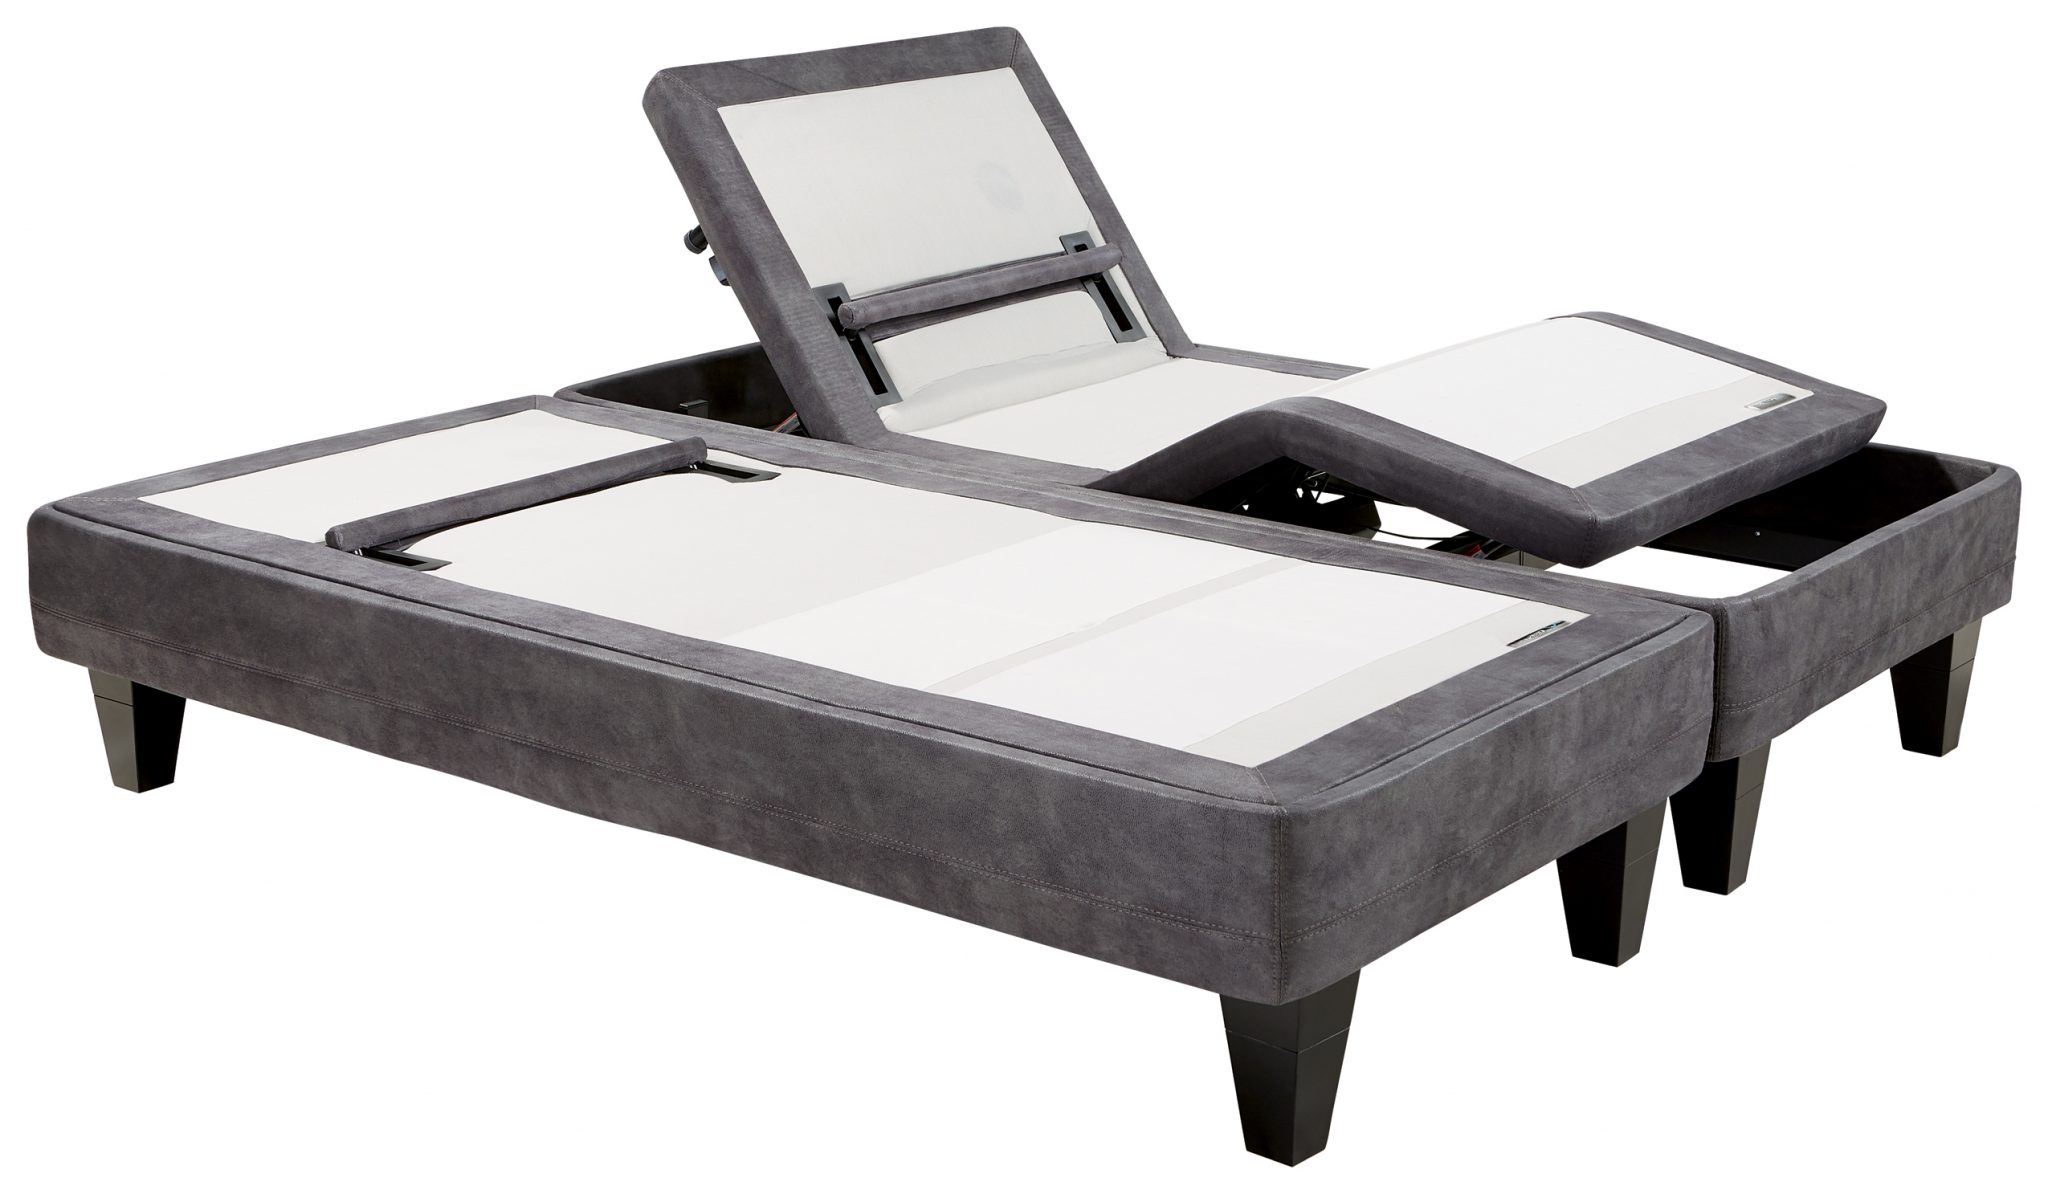 What Are The Reasons That Lead People To Buy Adjustable Beds?